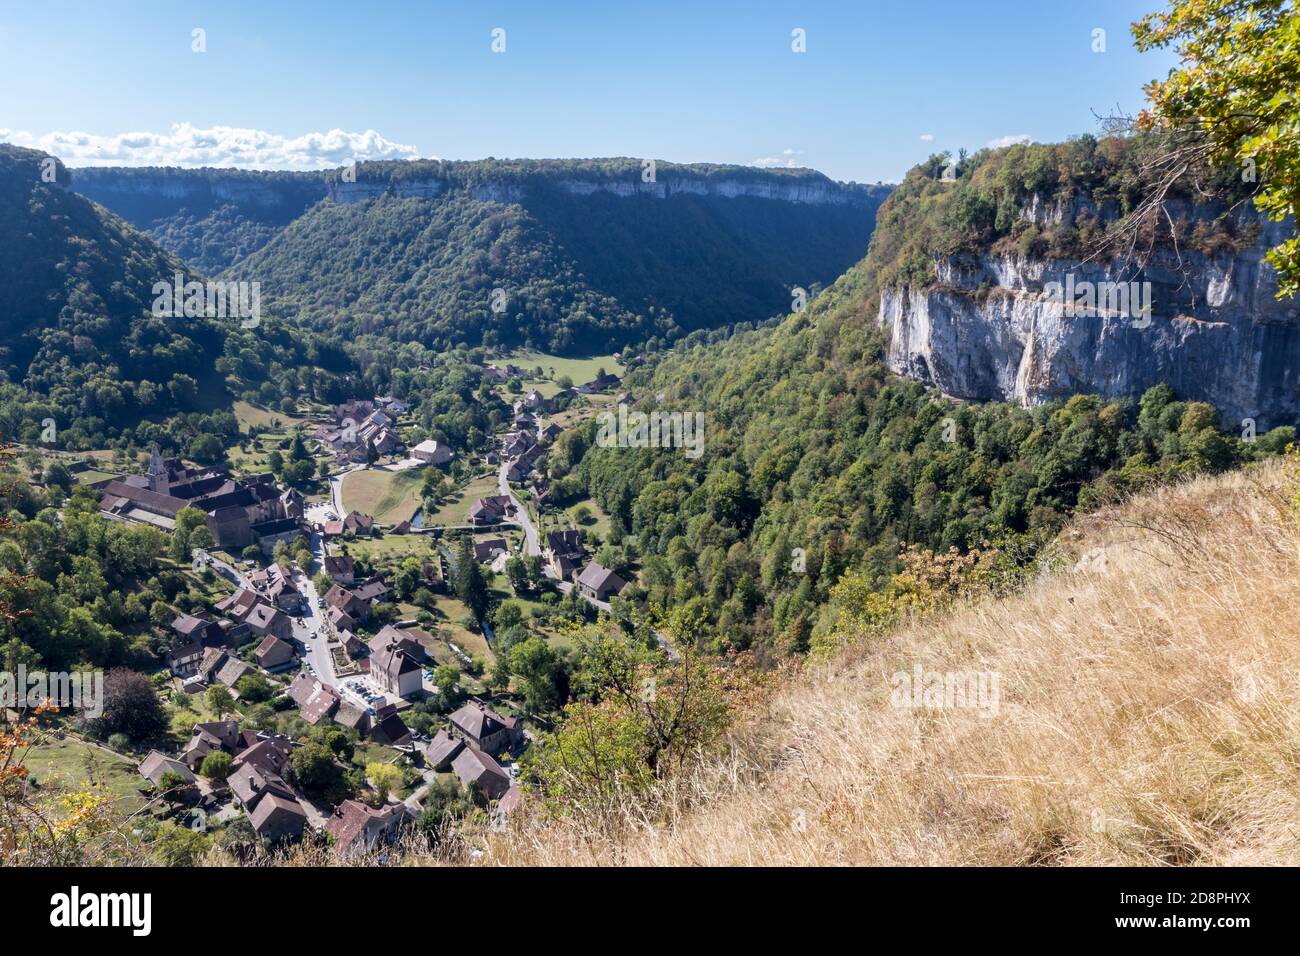 Baume Les Messieurs village, Valley, canyon from Jura, France Stock Photo